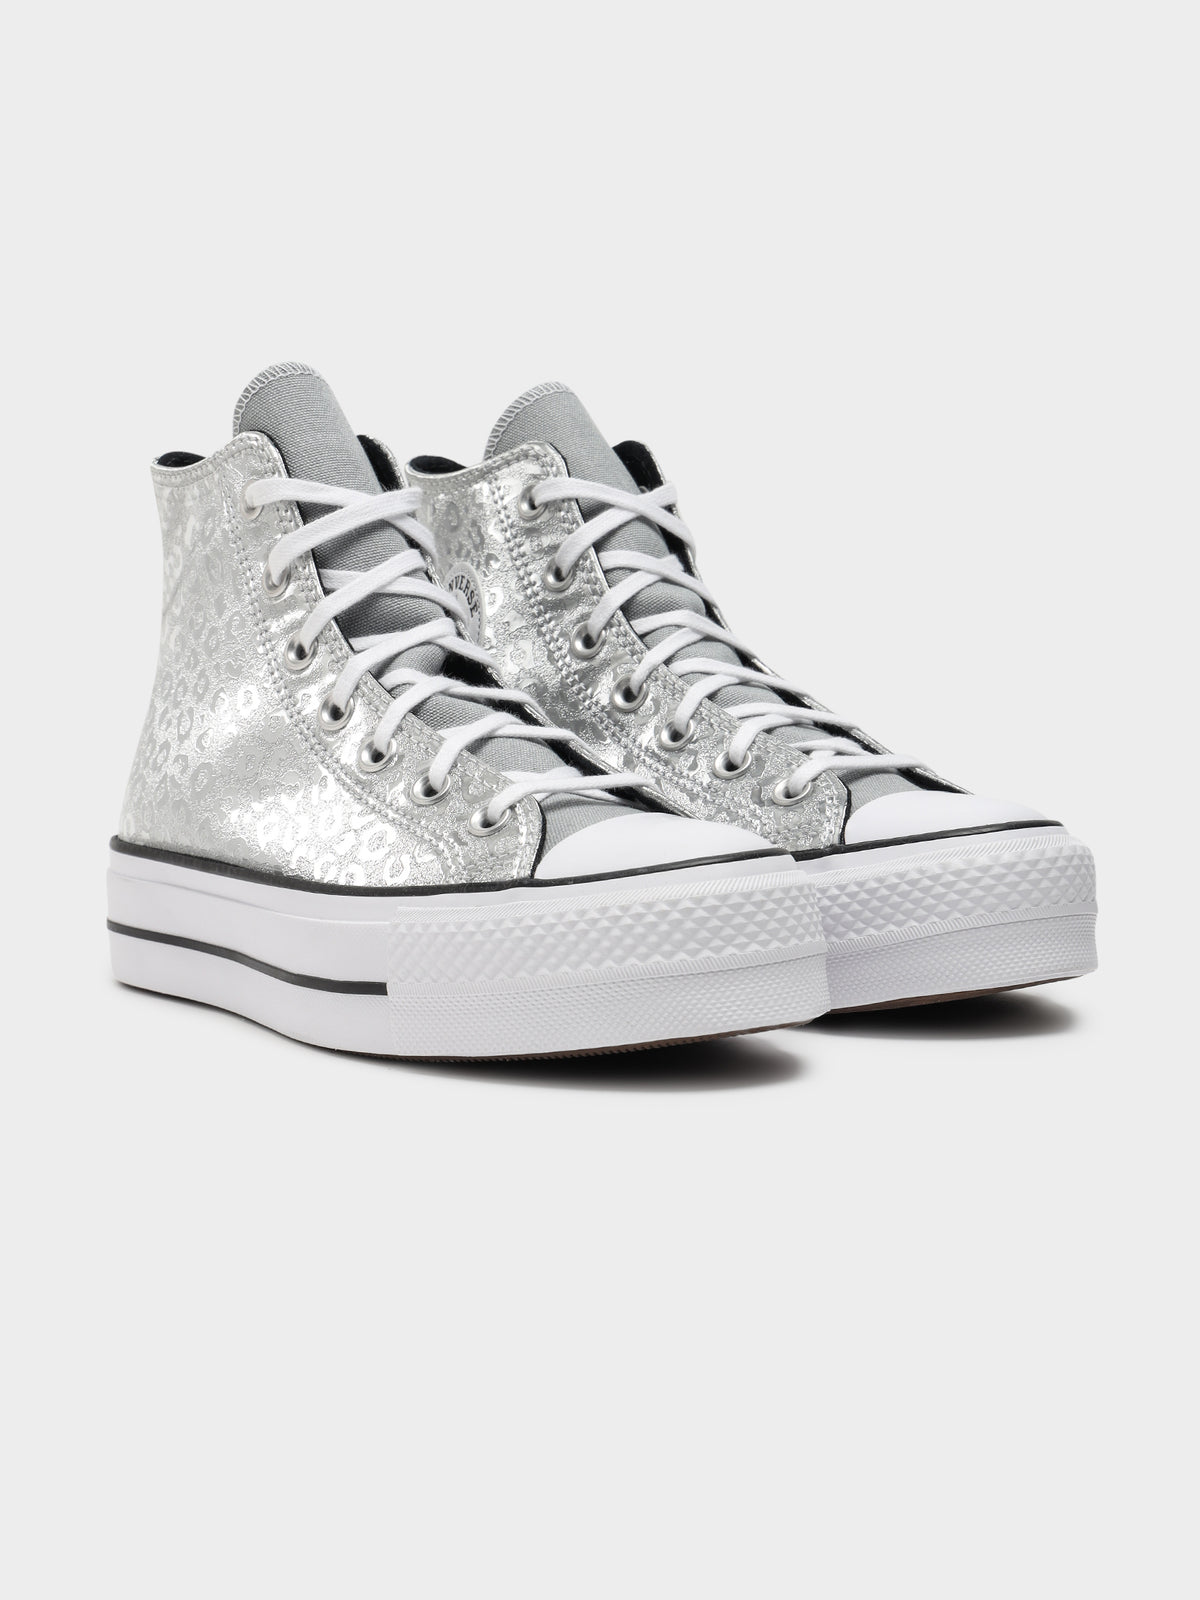 Womens Chuck Taylor All Star in Silver